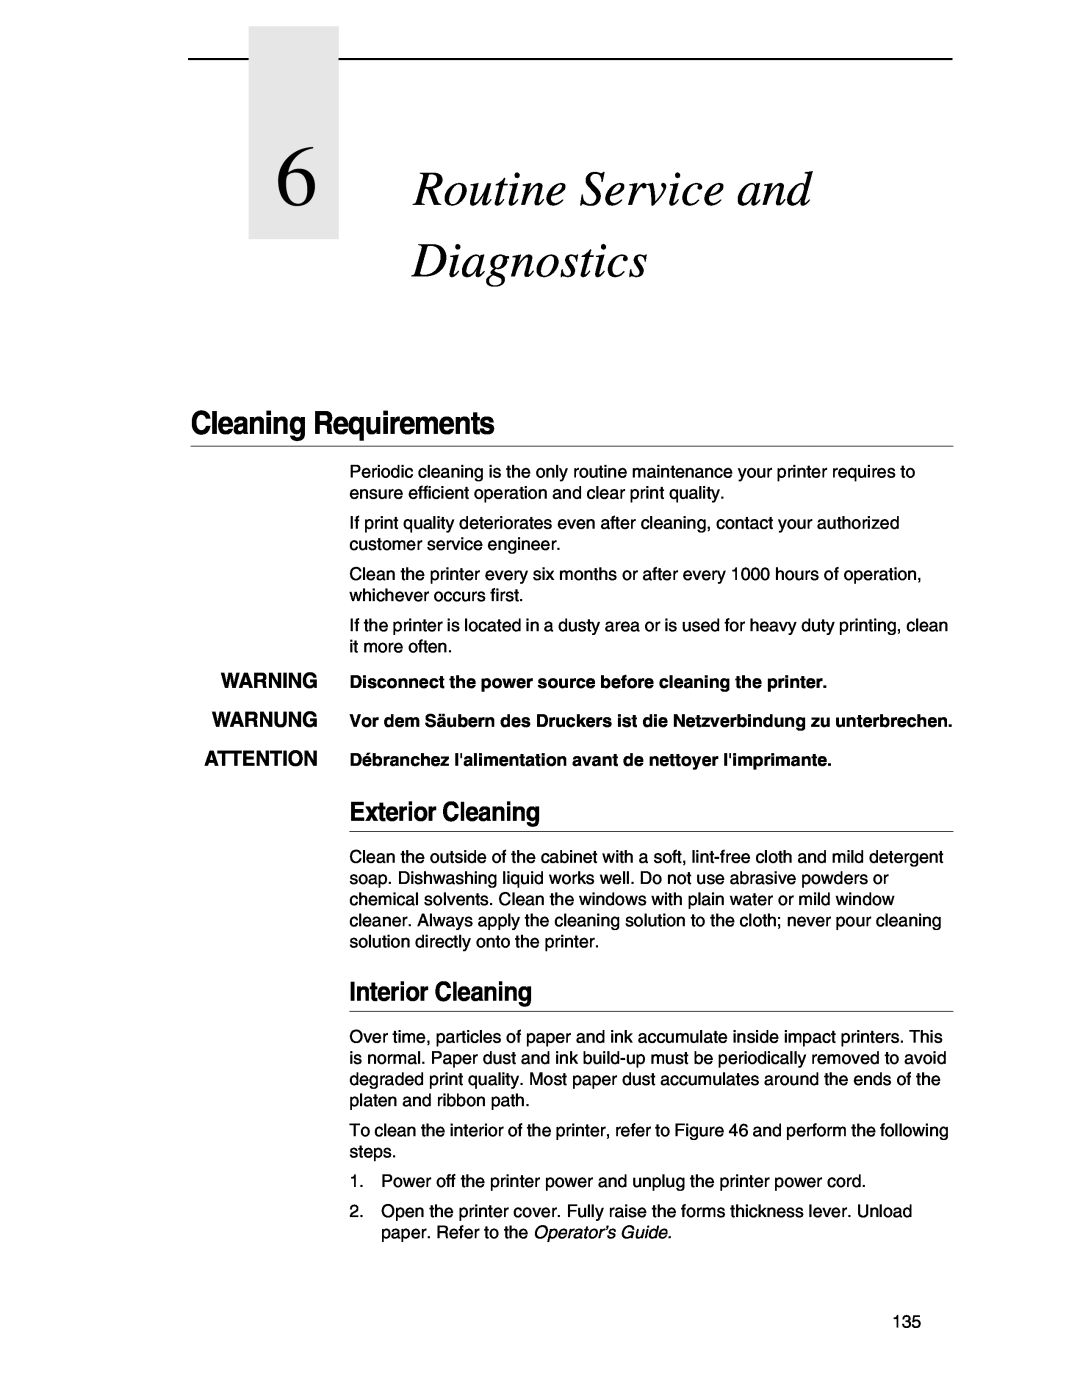 Compaq P5000 Series Routine Service and Diagnostics, Cleaning Requirements, Exterior Cleaning, Interior Cleaning 